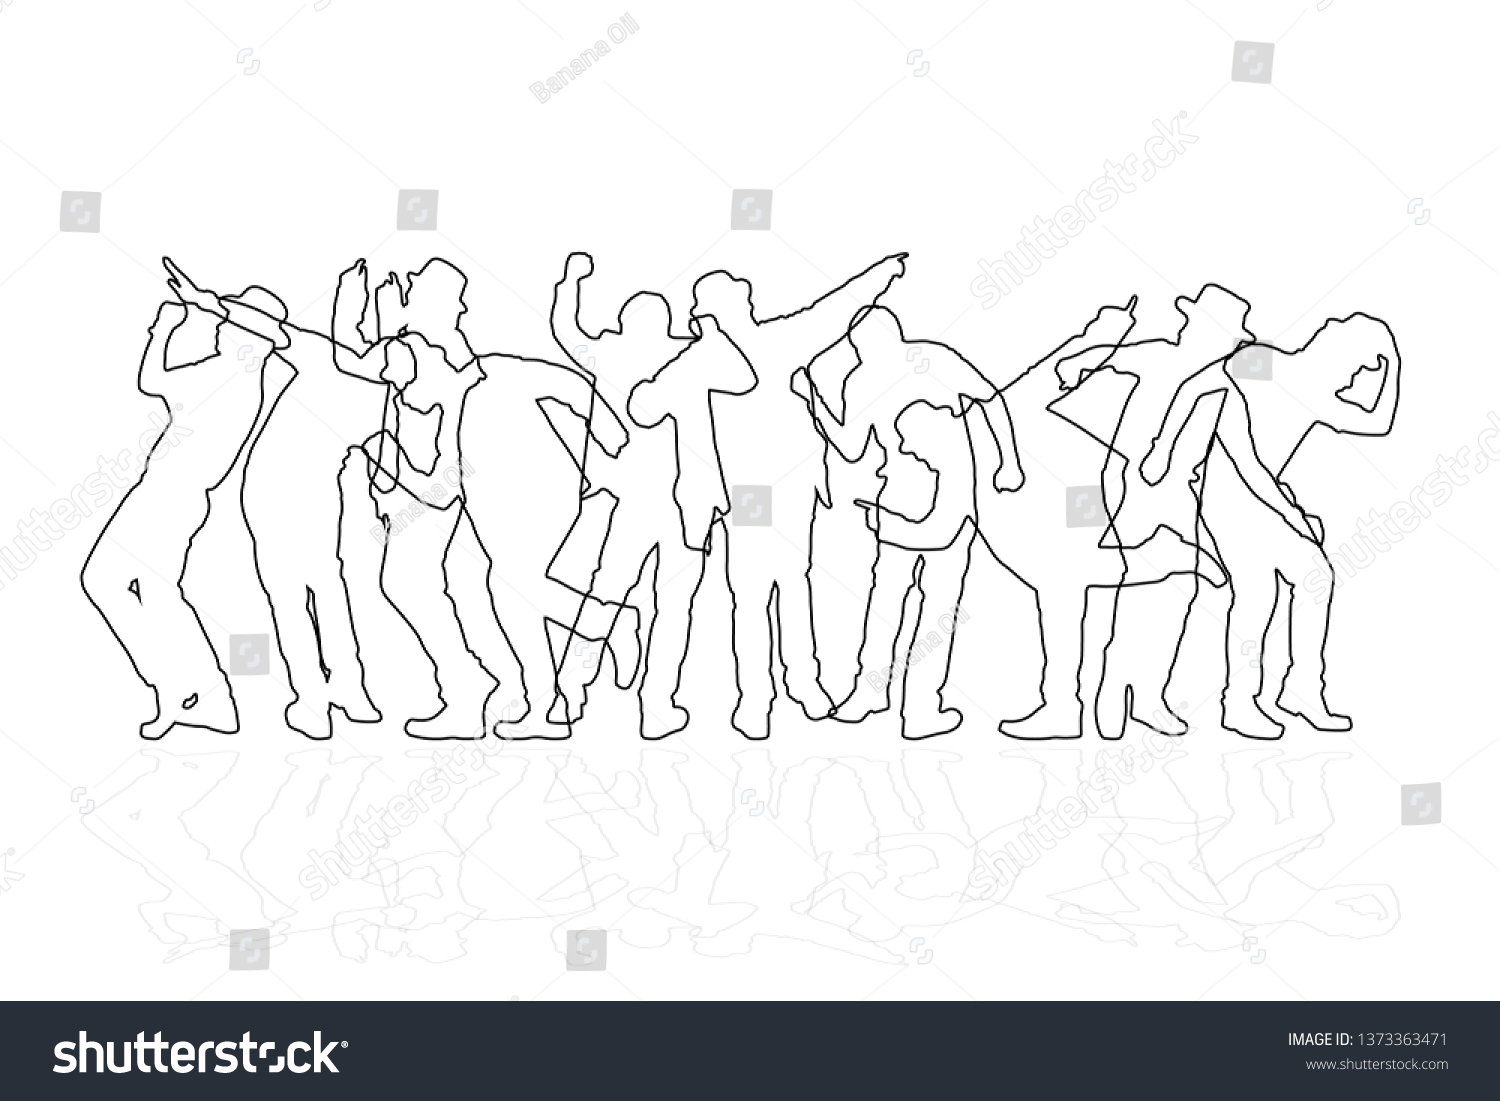 Line group of people dancing on white background. Happy celebration concept. Eps10 Vector illustration. #1373363471